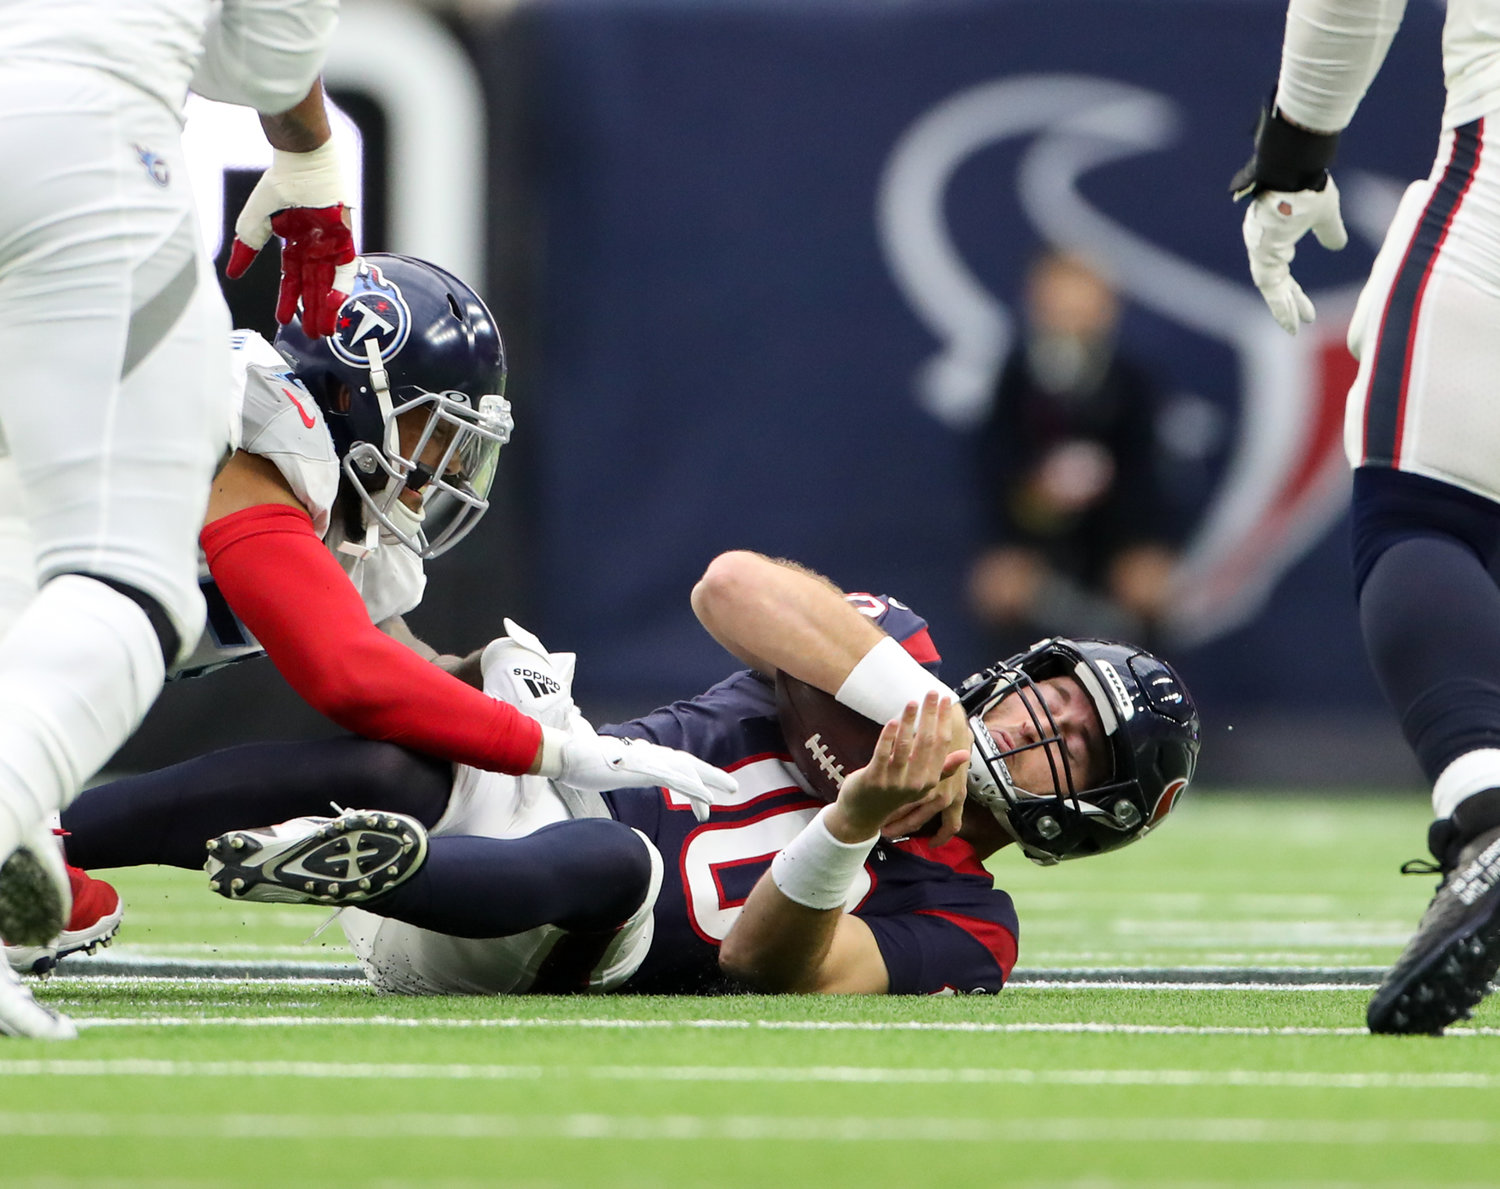 Houston Texans quarterback Davis Mills (10) is sacked during an NFL game between the Texans and the Titans on Jan. 9, 2022 in Houston, Texas.